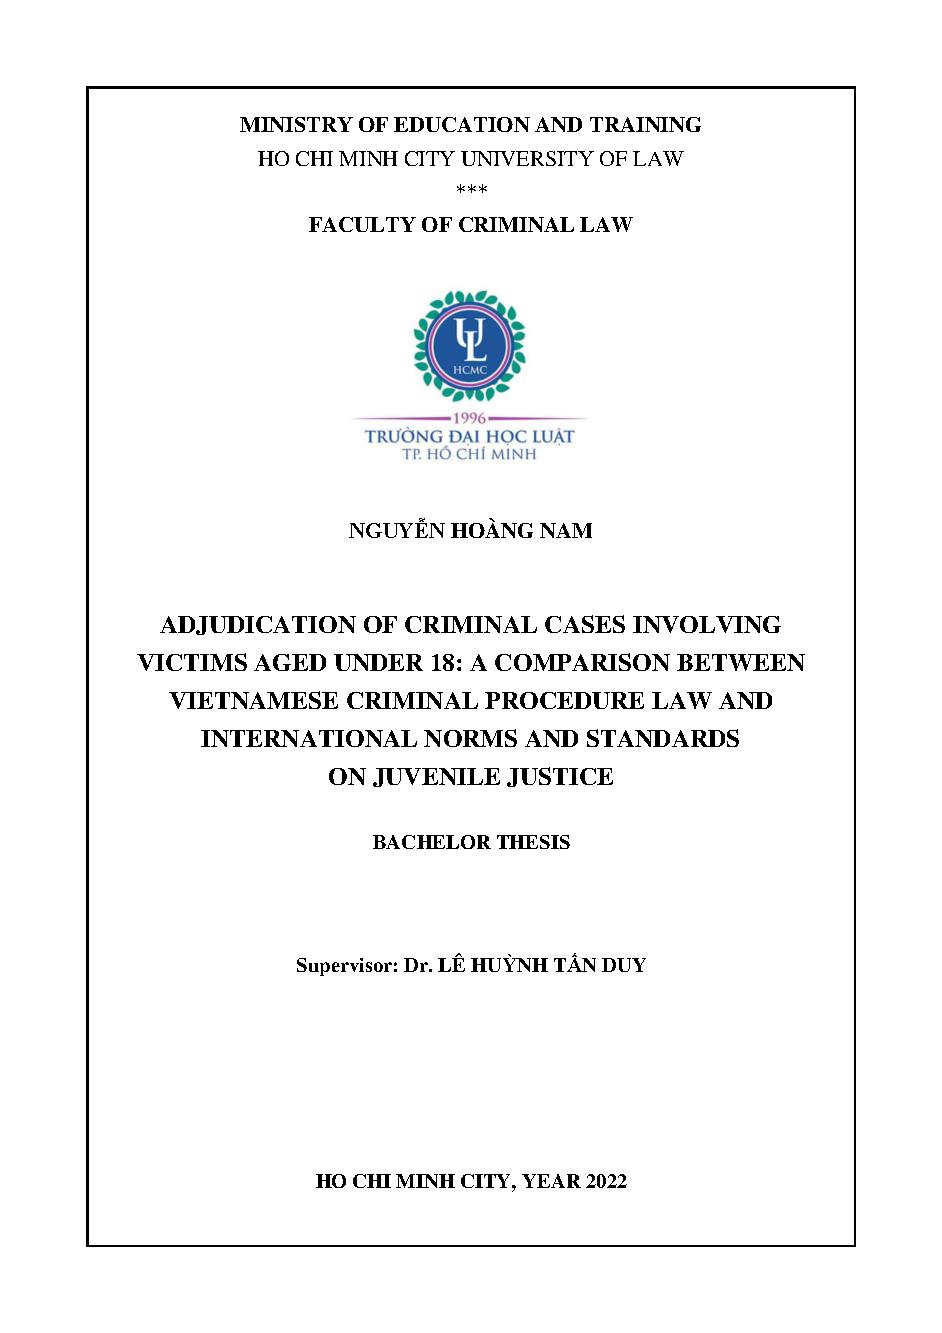 Adjudication of criminal cases involving victims ages under 18: A comparison between Vietnamese criminal procedure law and international norms and standards on juvenile justice